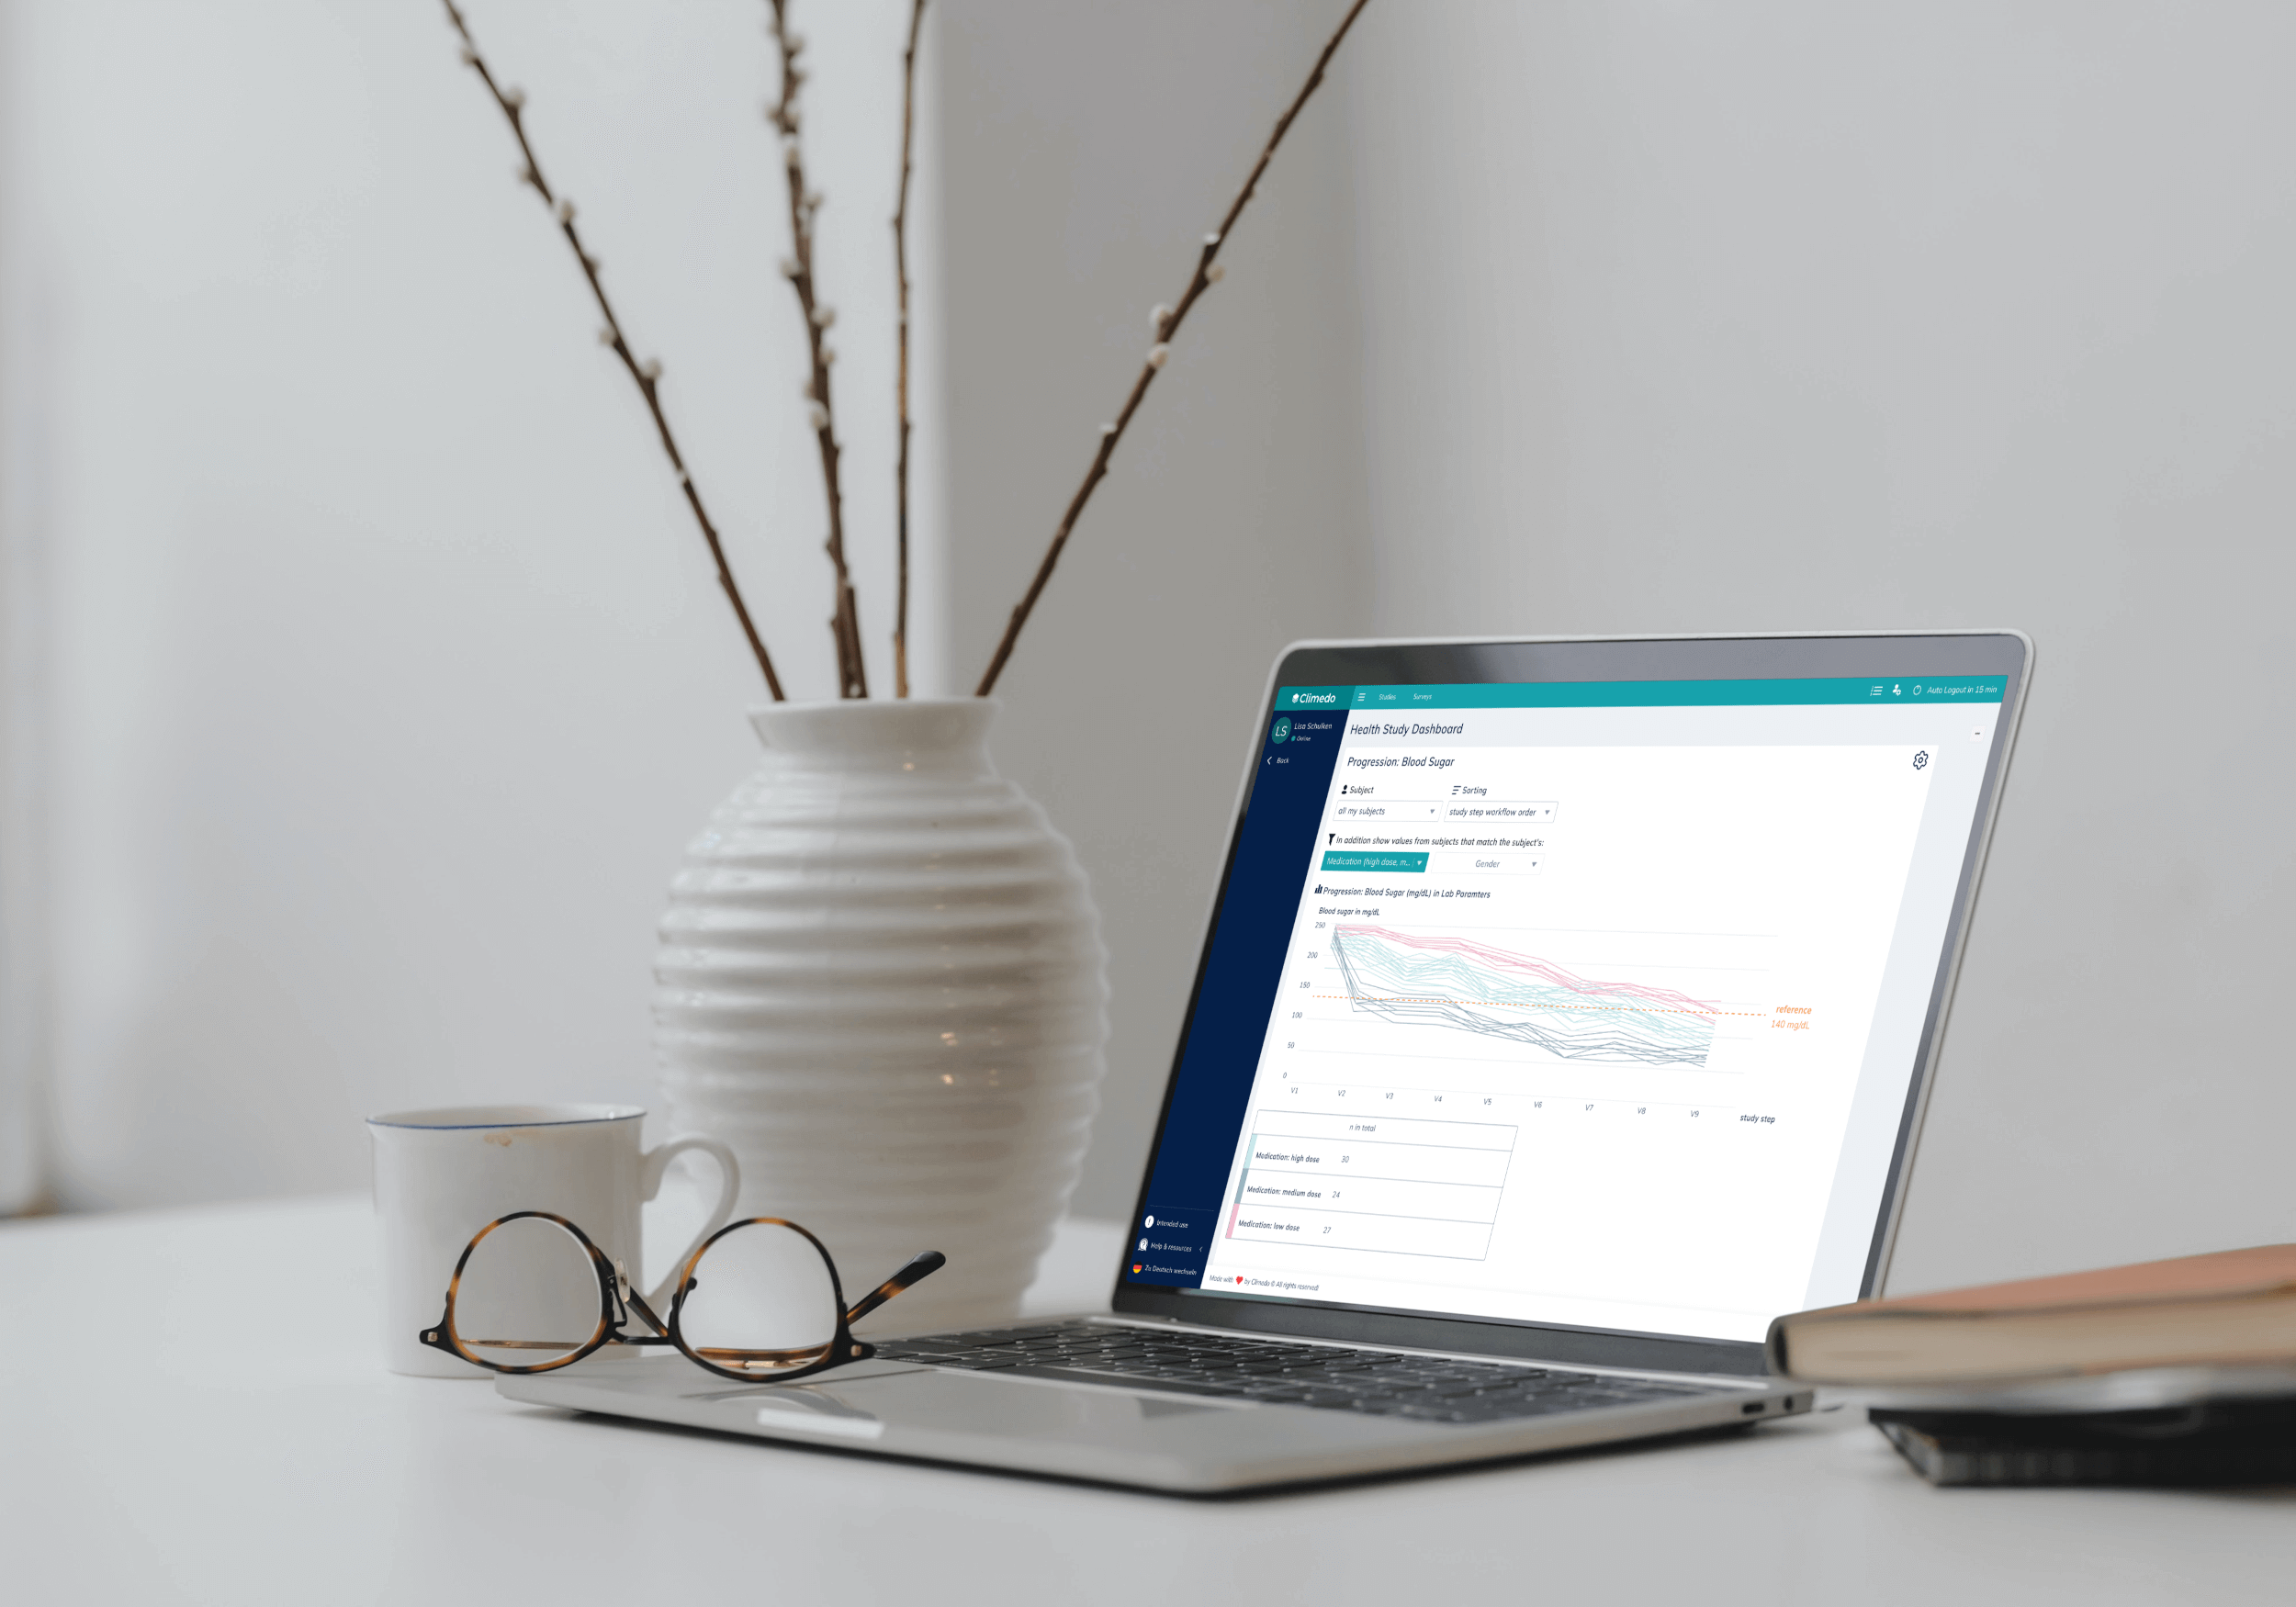 Climedo Releases Improved Features to Revolutionize Clinical Data Insights and Progress Tracking